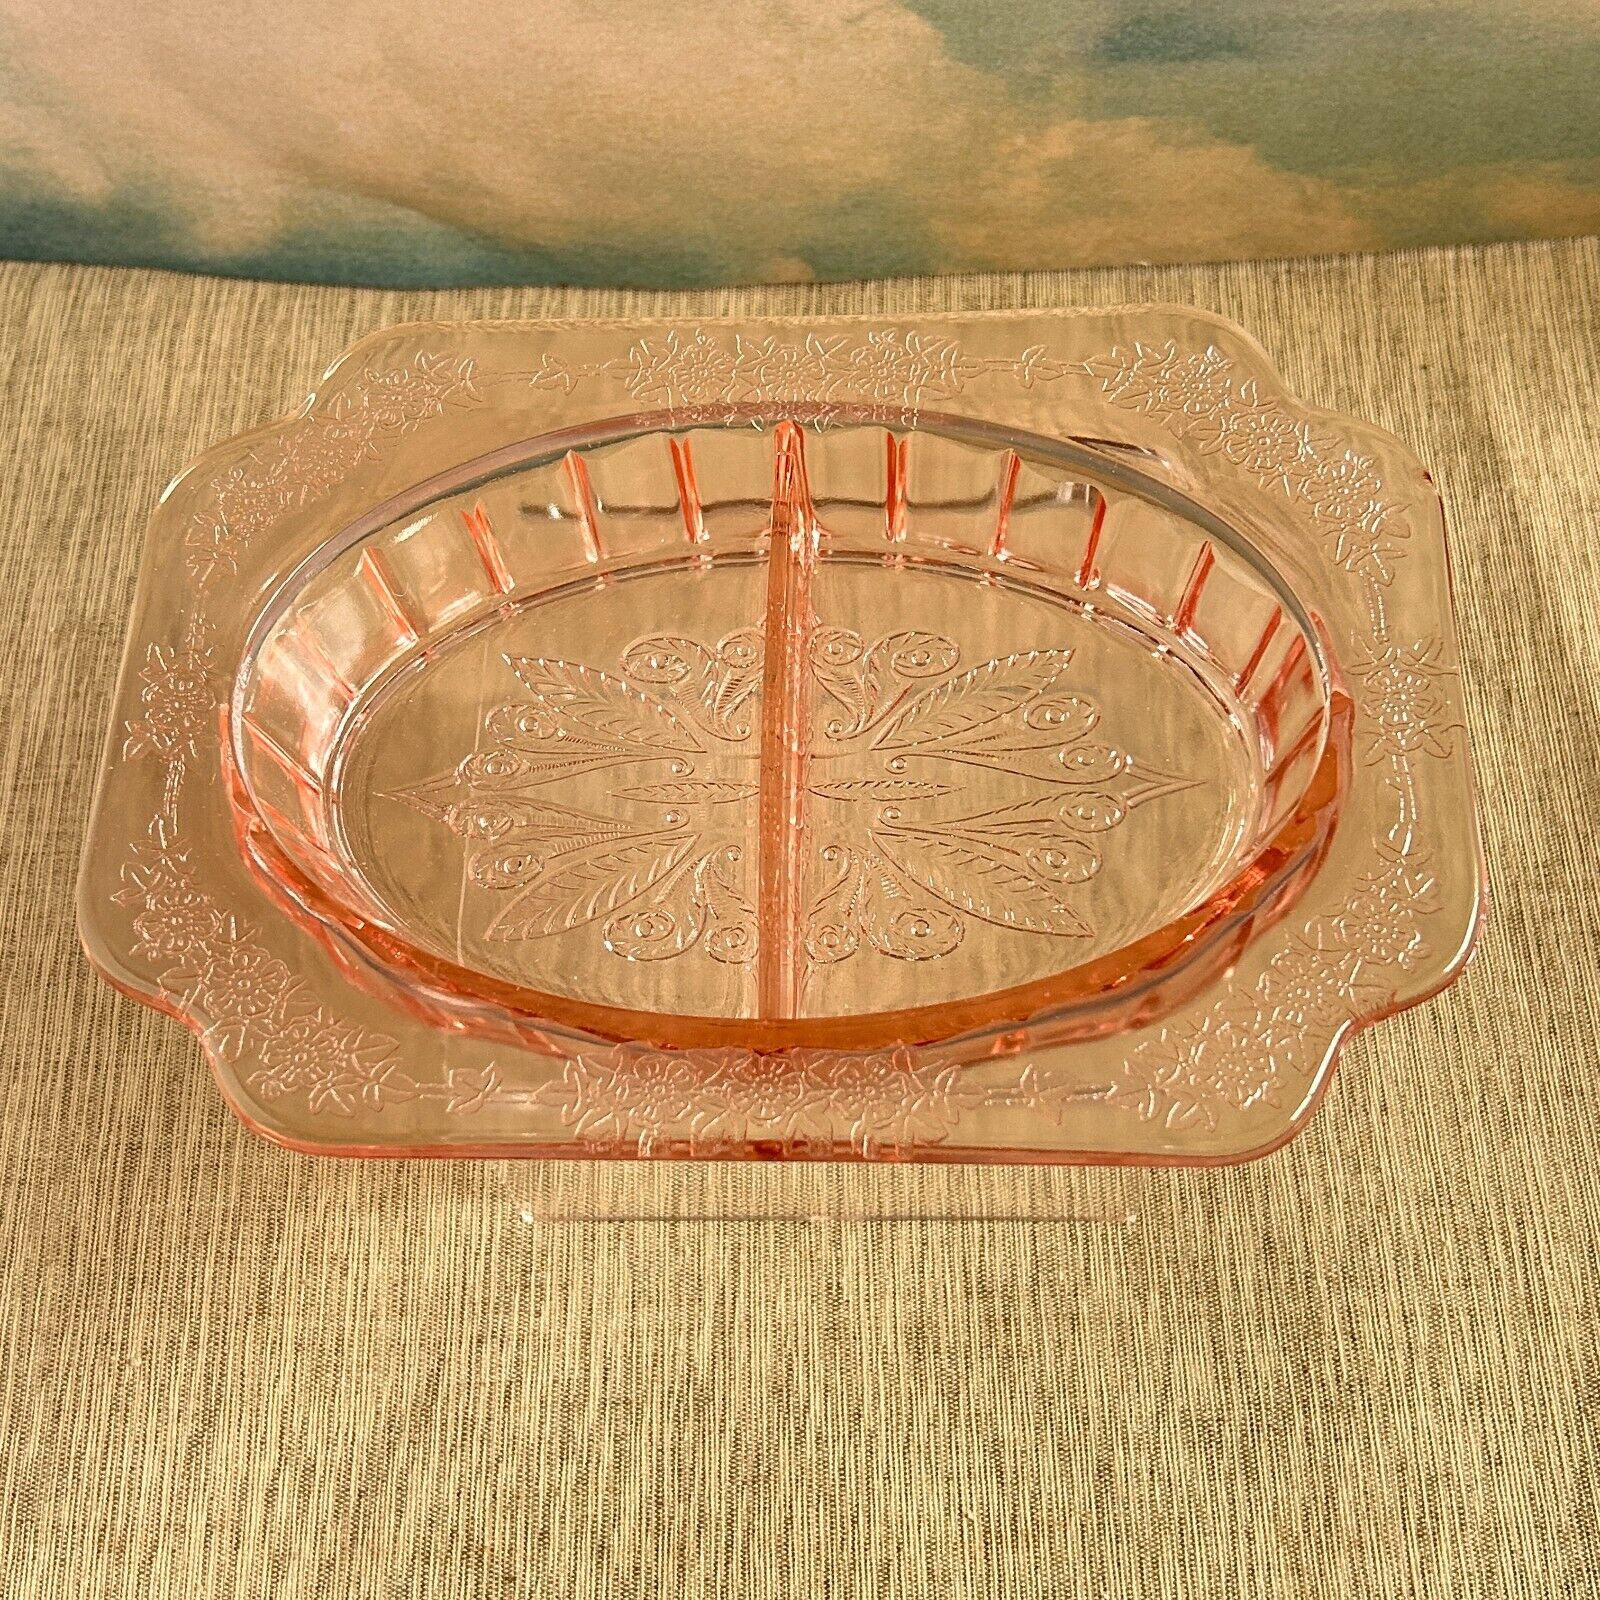 Vintage Jeanette Glass Adam Pink Relish Dish Divided Plate